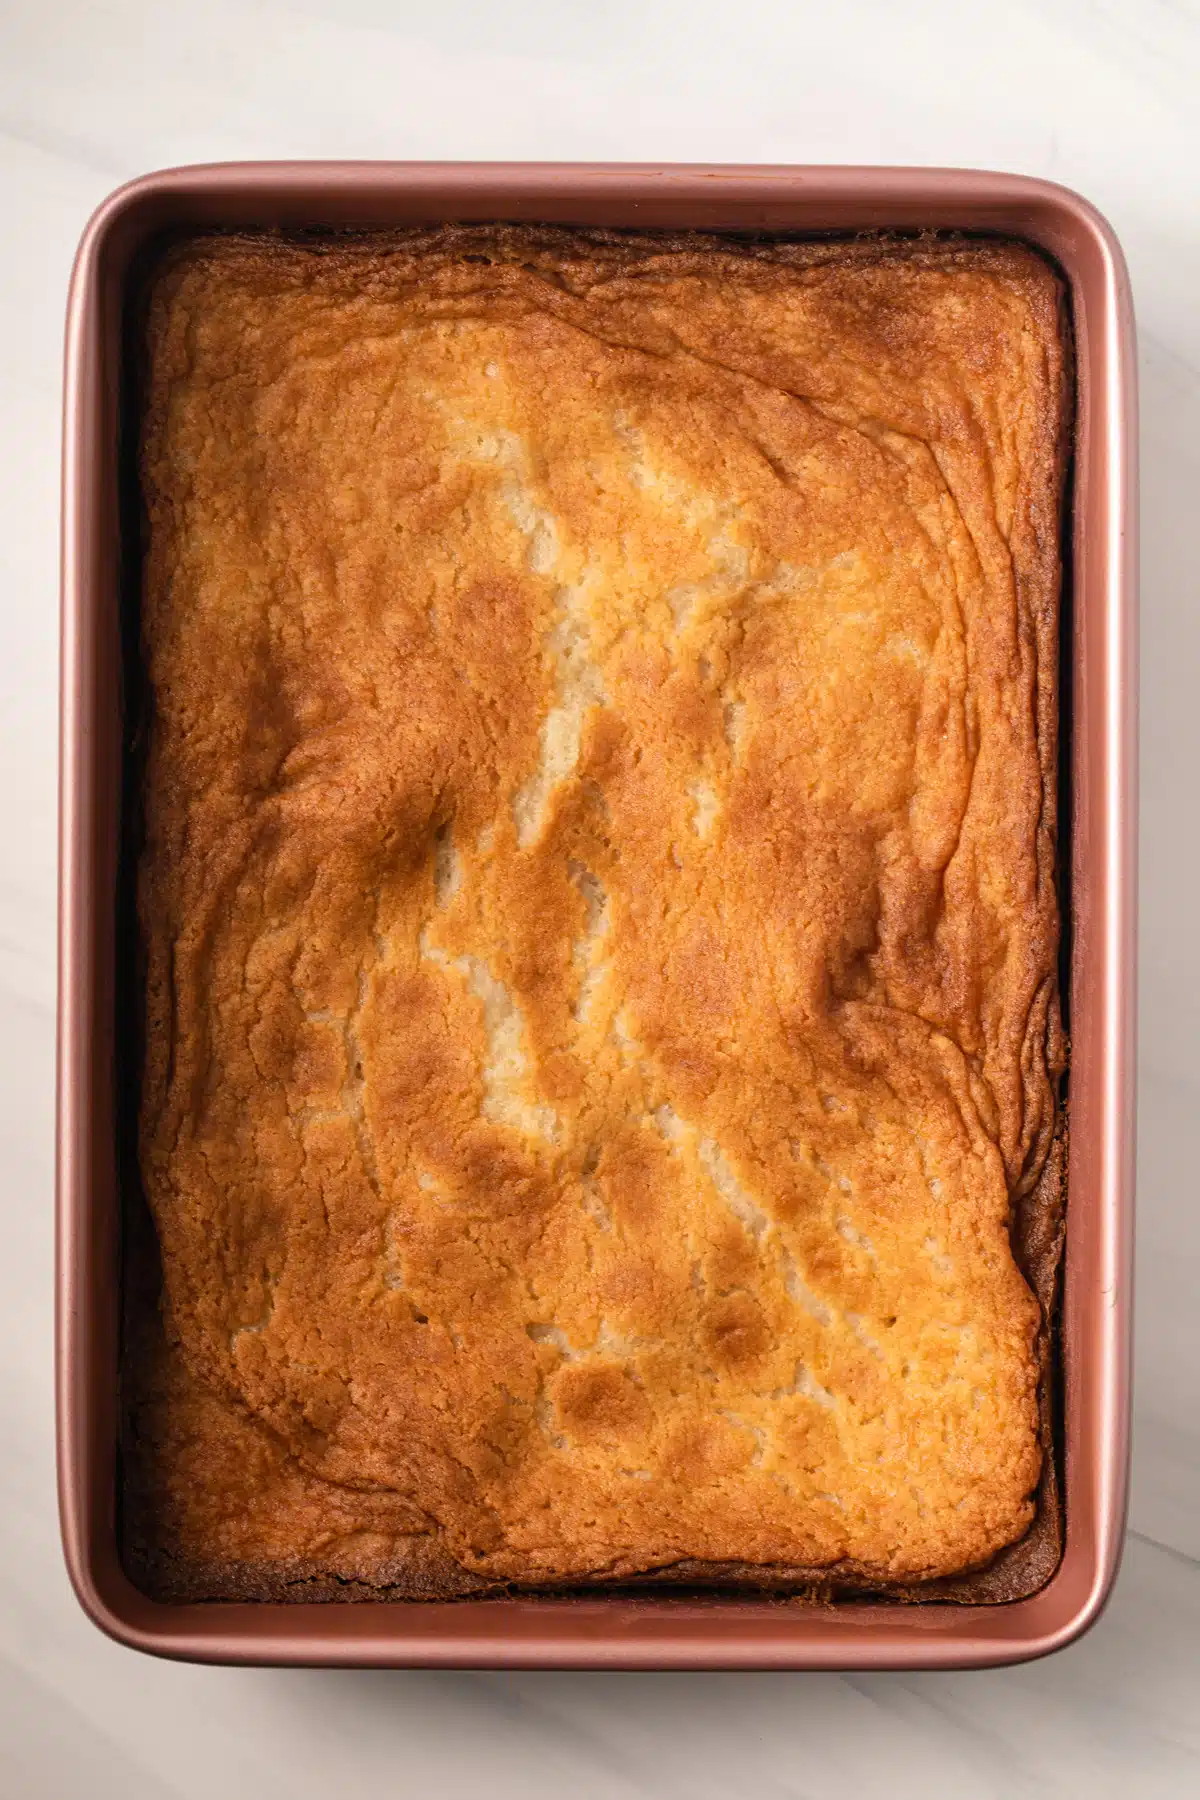 Gooey butter cake in a cake pan.